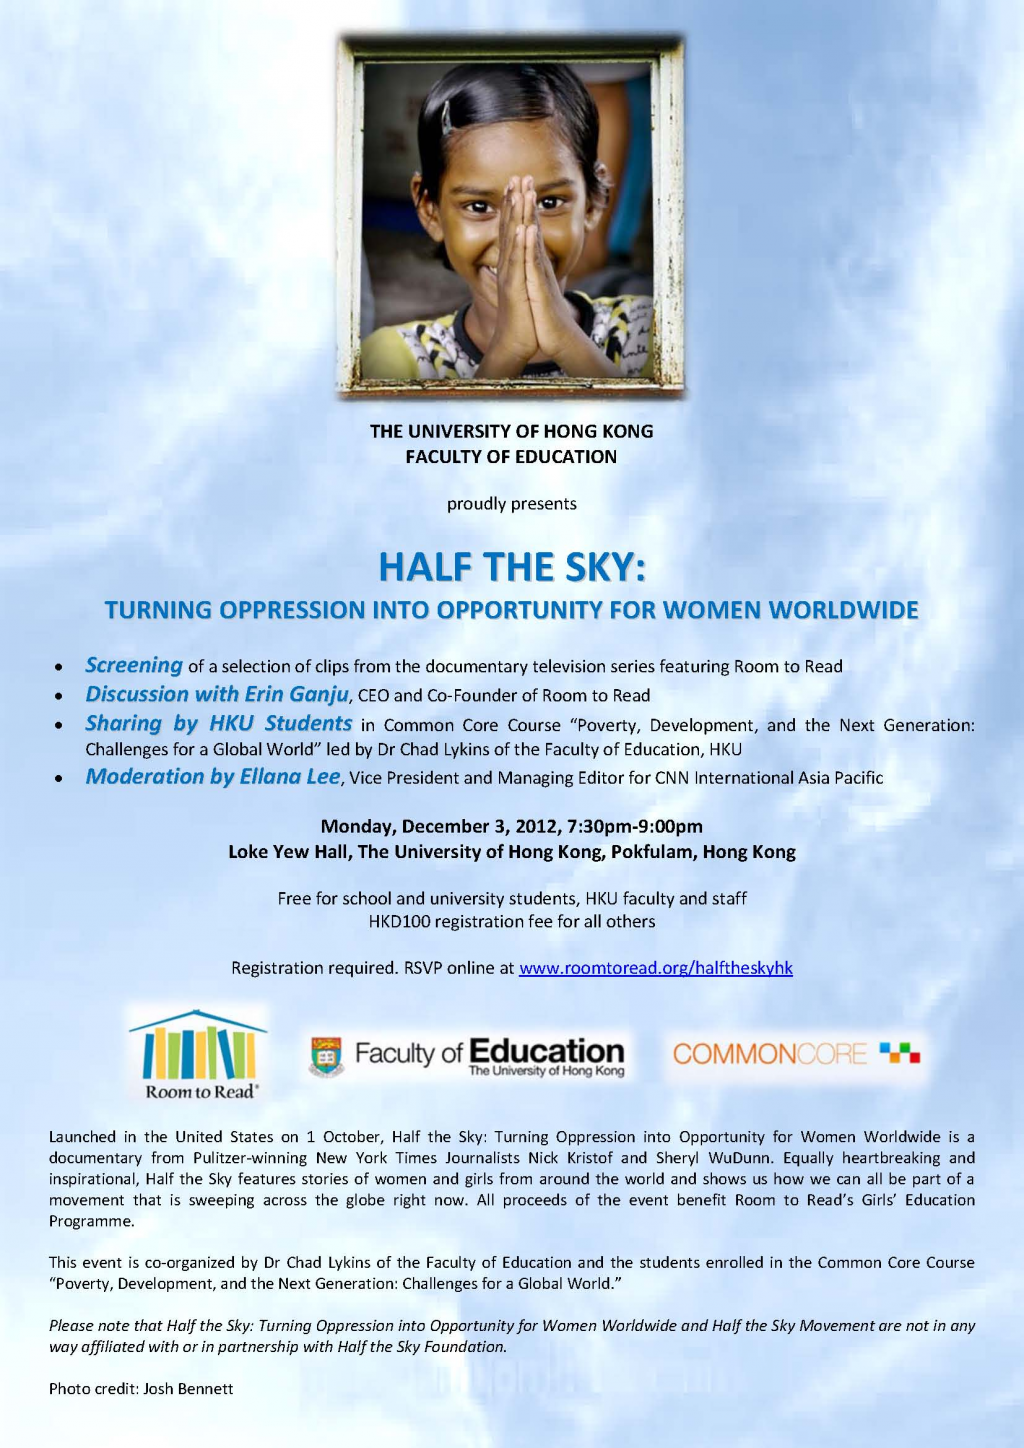 HALF THE SKY: Turning Oppression into Opportunity for Women Worldwide